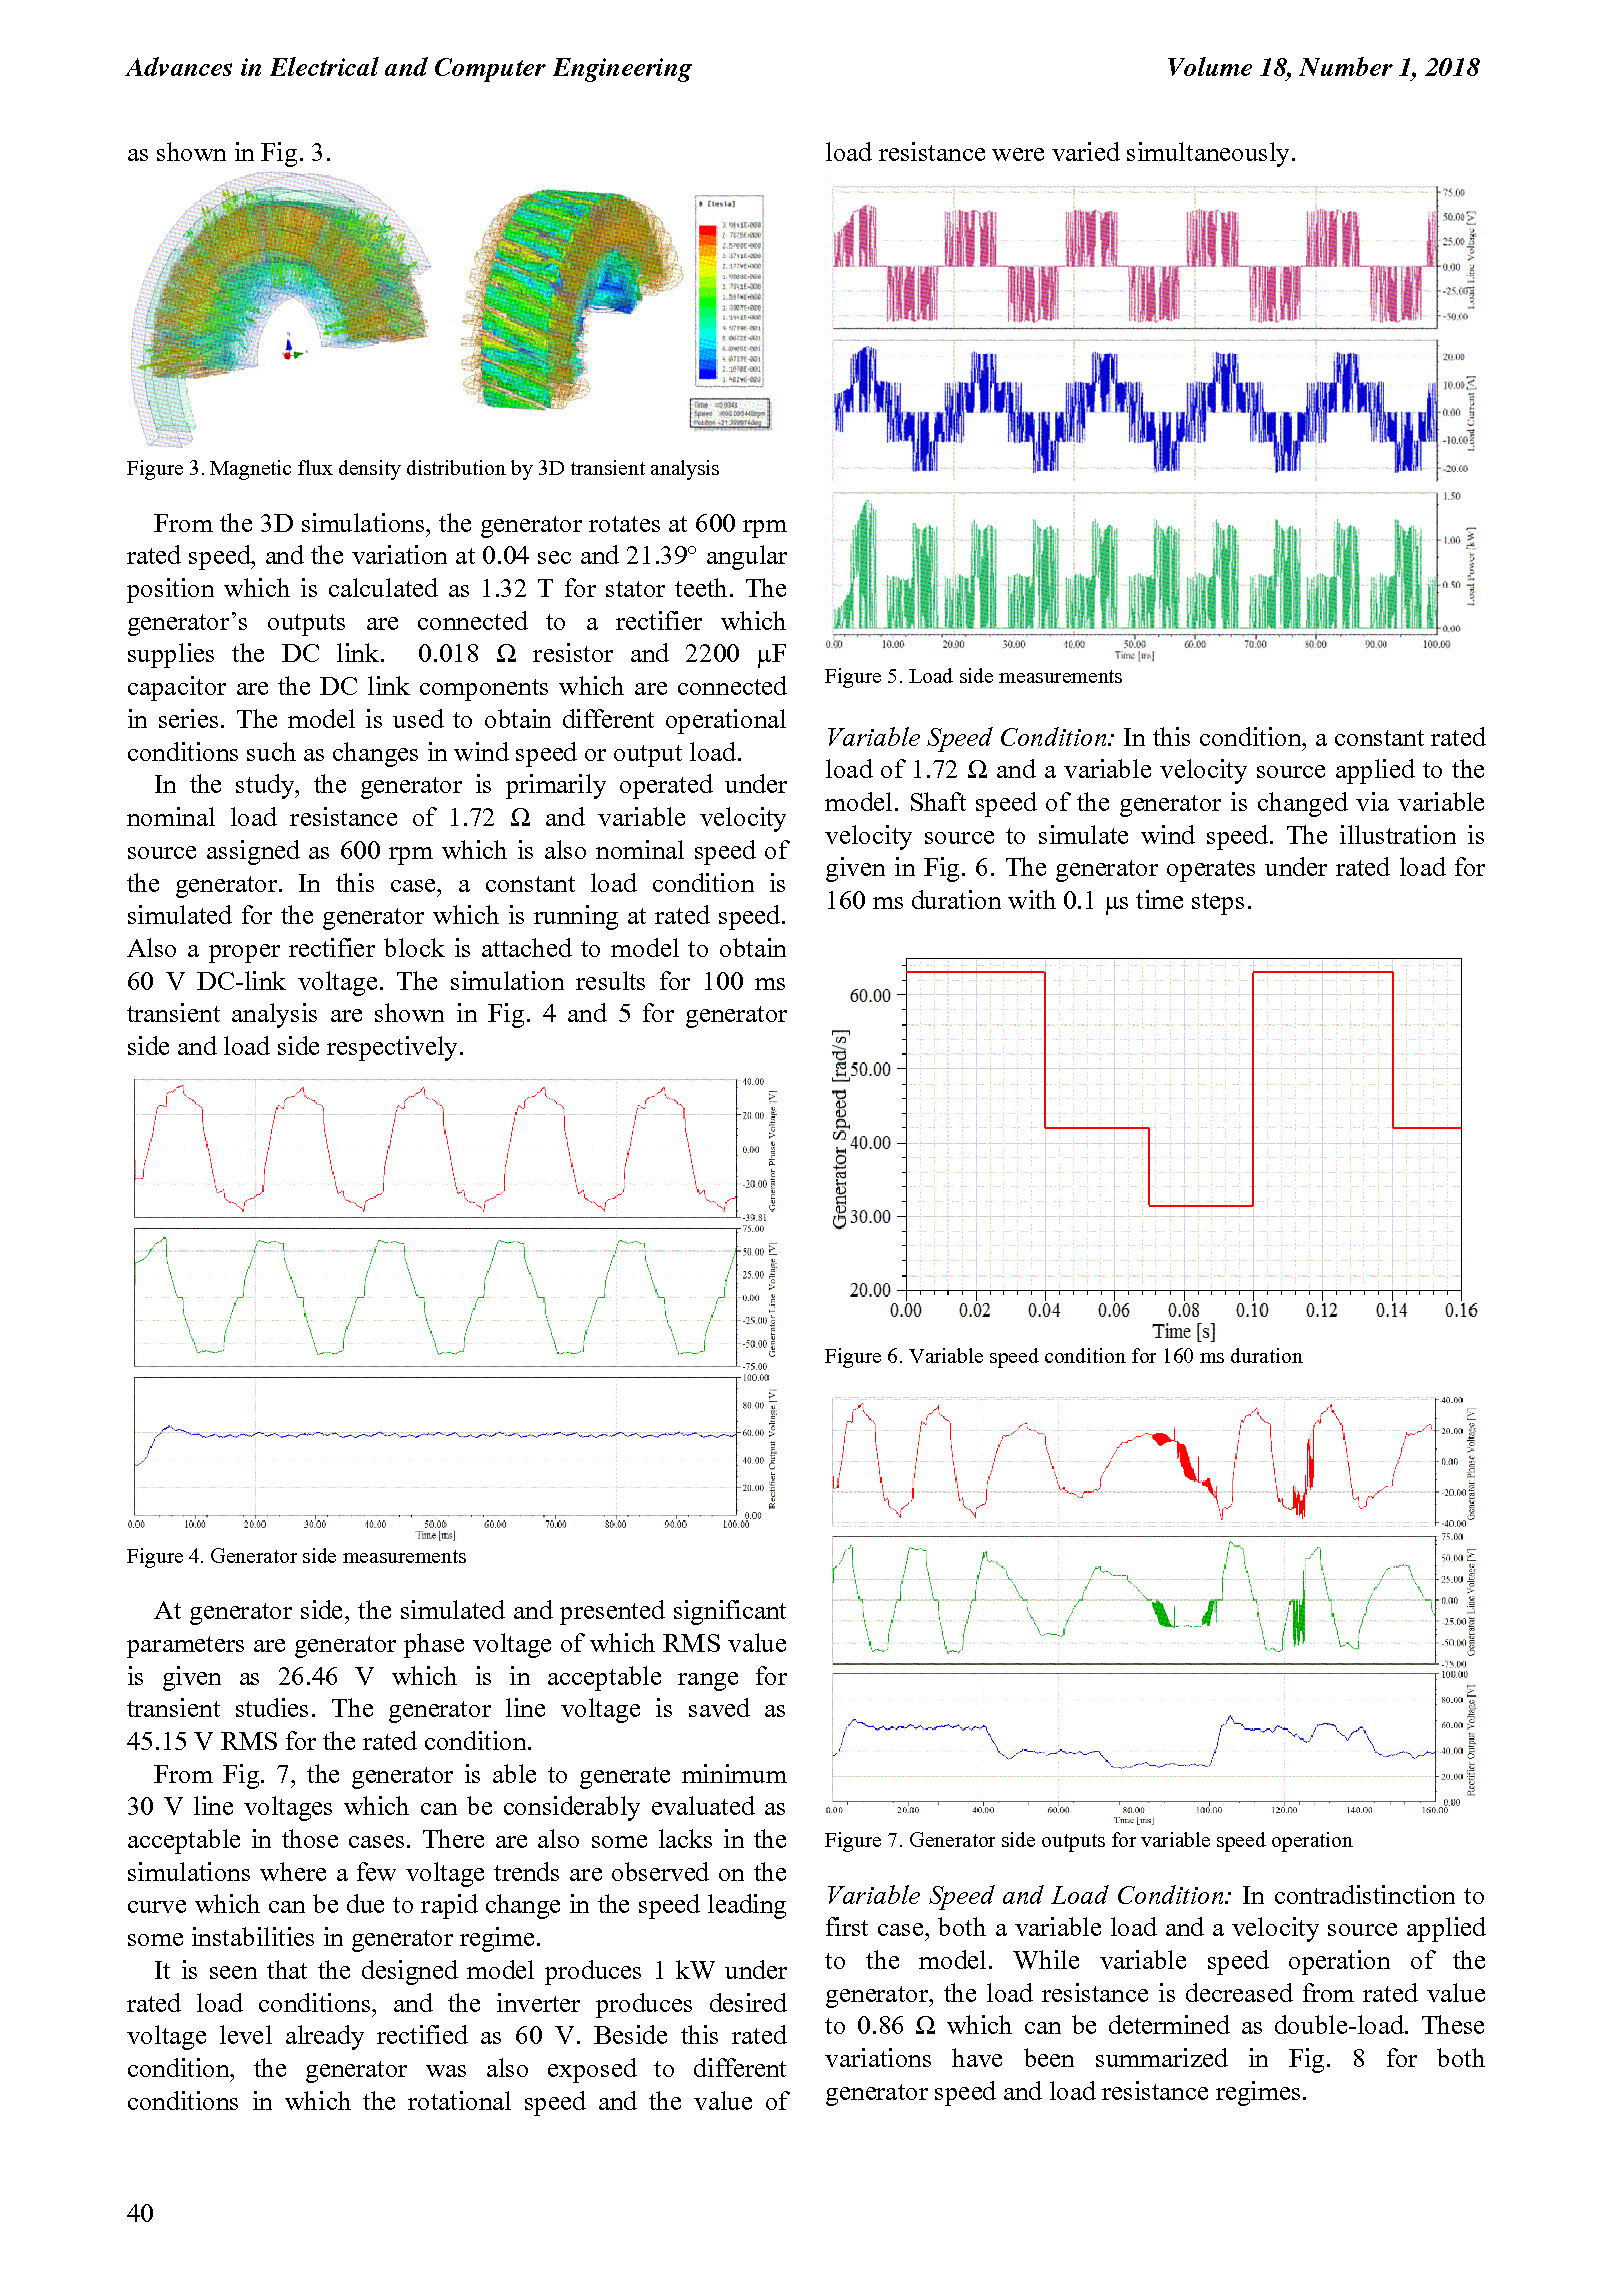 PDF Quickview for paper with DOI:10.4316/AECE.2018.01005